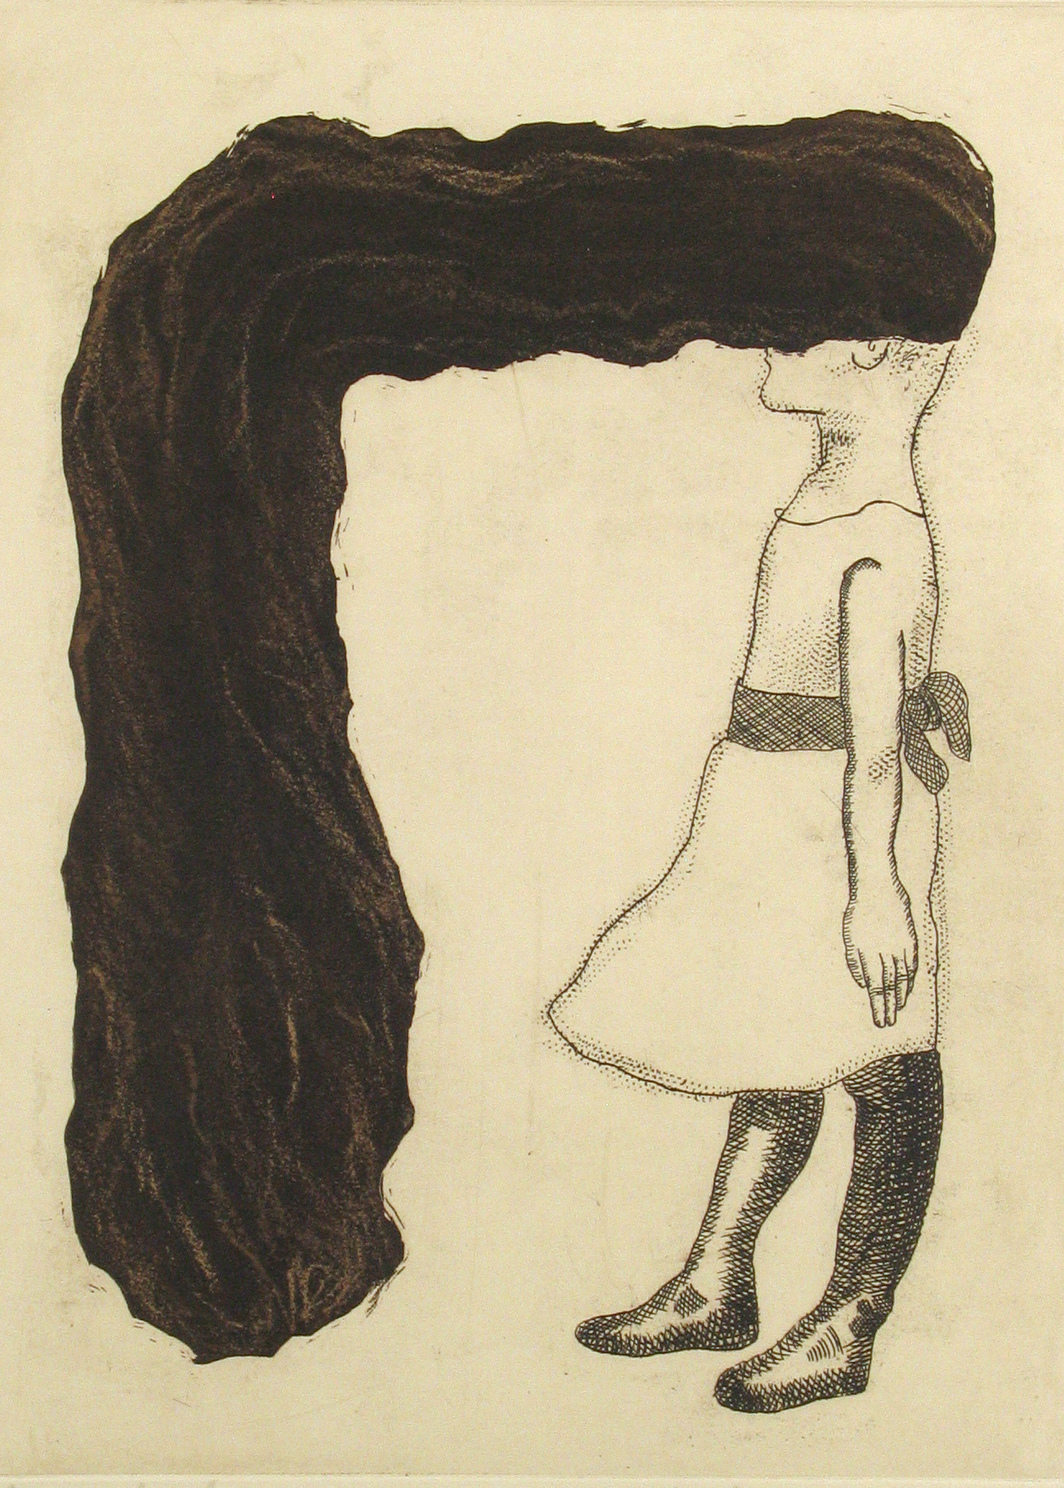 Alice Maher, Talking to My Hair, 1994, Etching and aquatint on paper. Collection & image © Hugh Lane Gallery. Presented by the Graphic Studio Gallery, Dublin, 1998.© Alice Maher. | Bones in the Attic | Thursday 11 August – Sunday 30 October 2022 | Hugh Lane Gallery